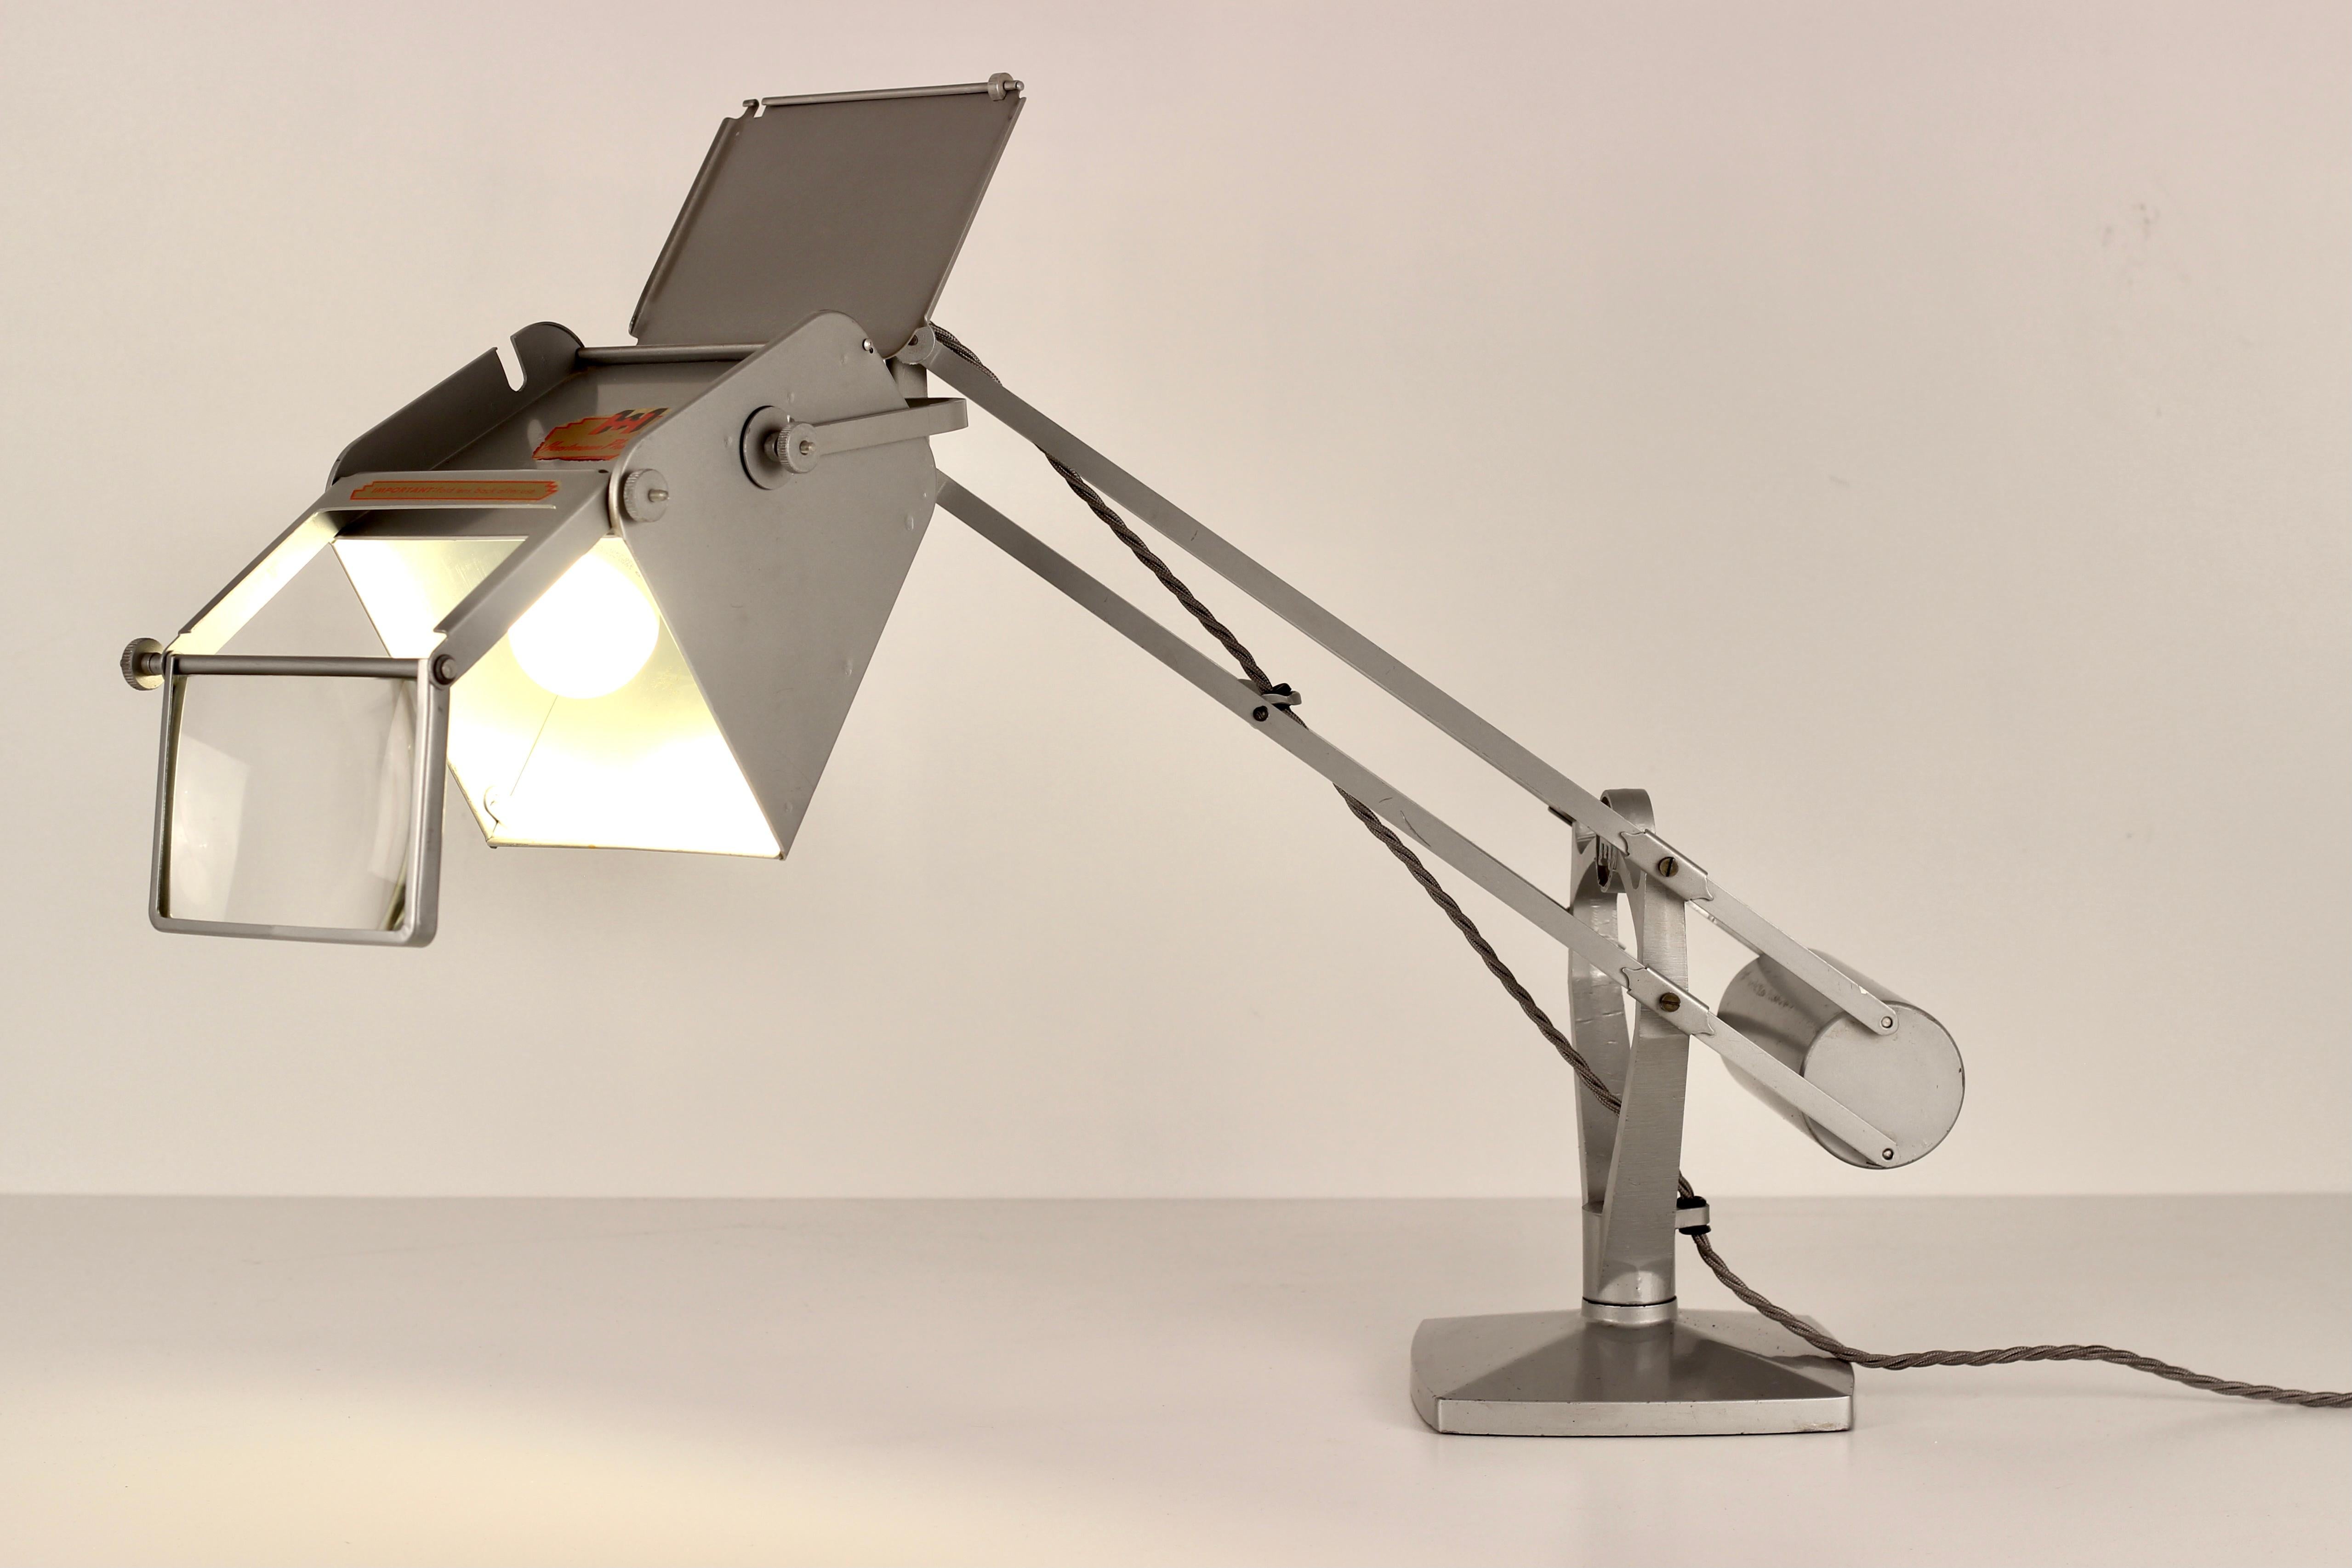 anglepoise lamp with magnifying glass